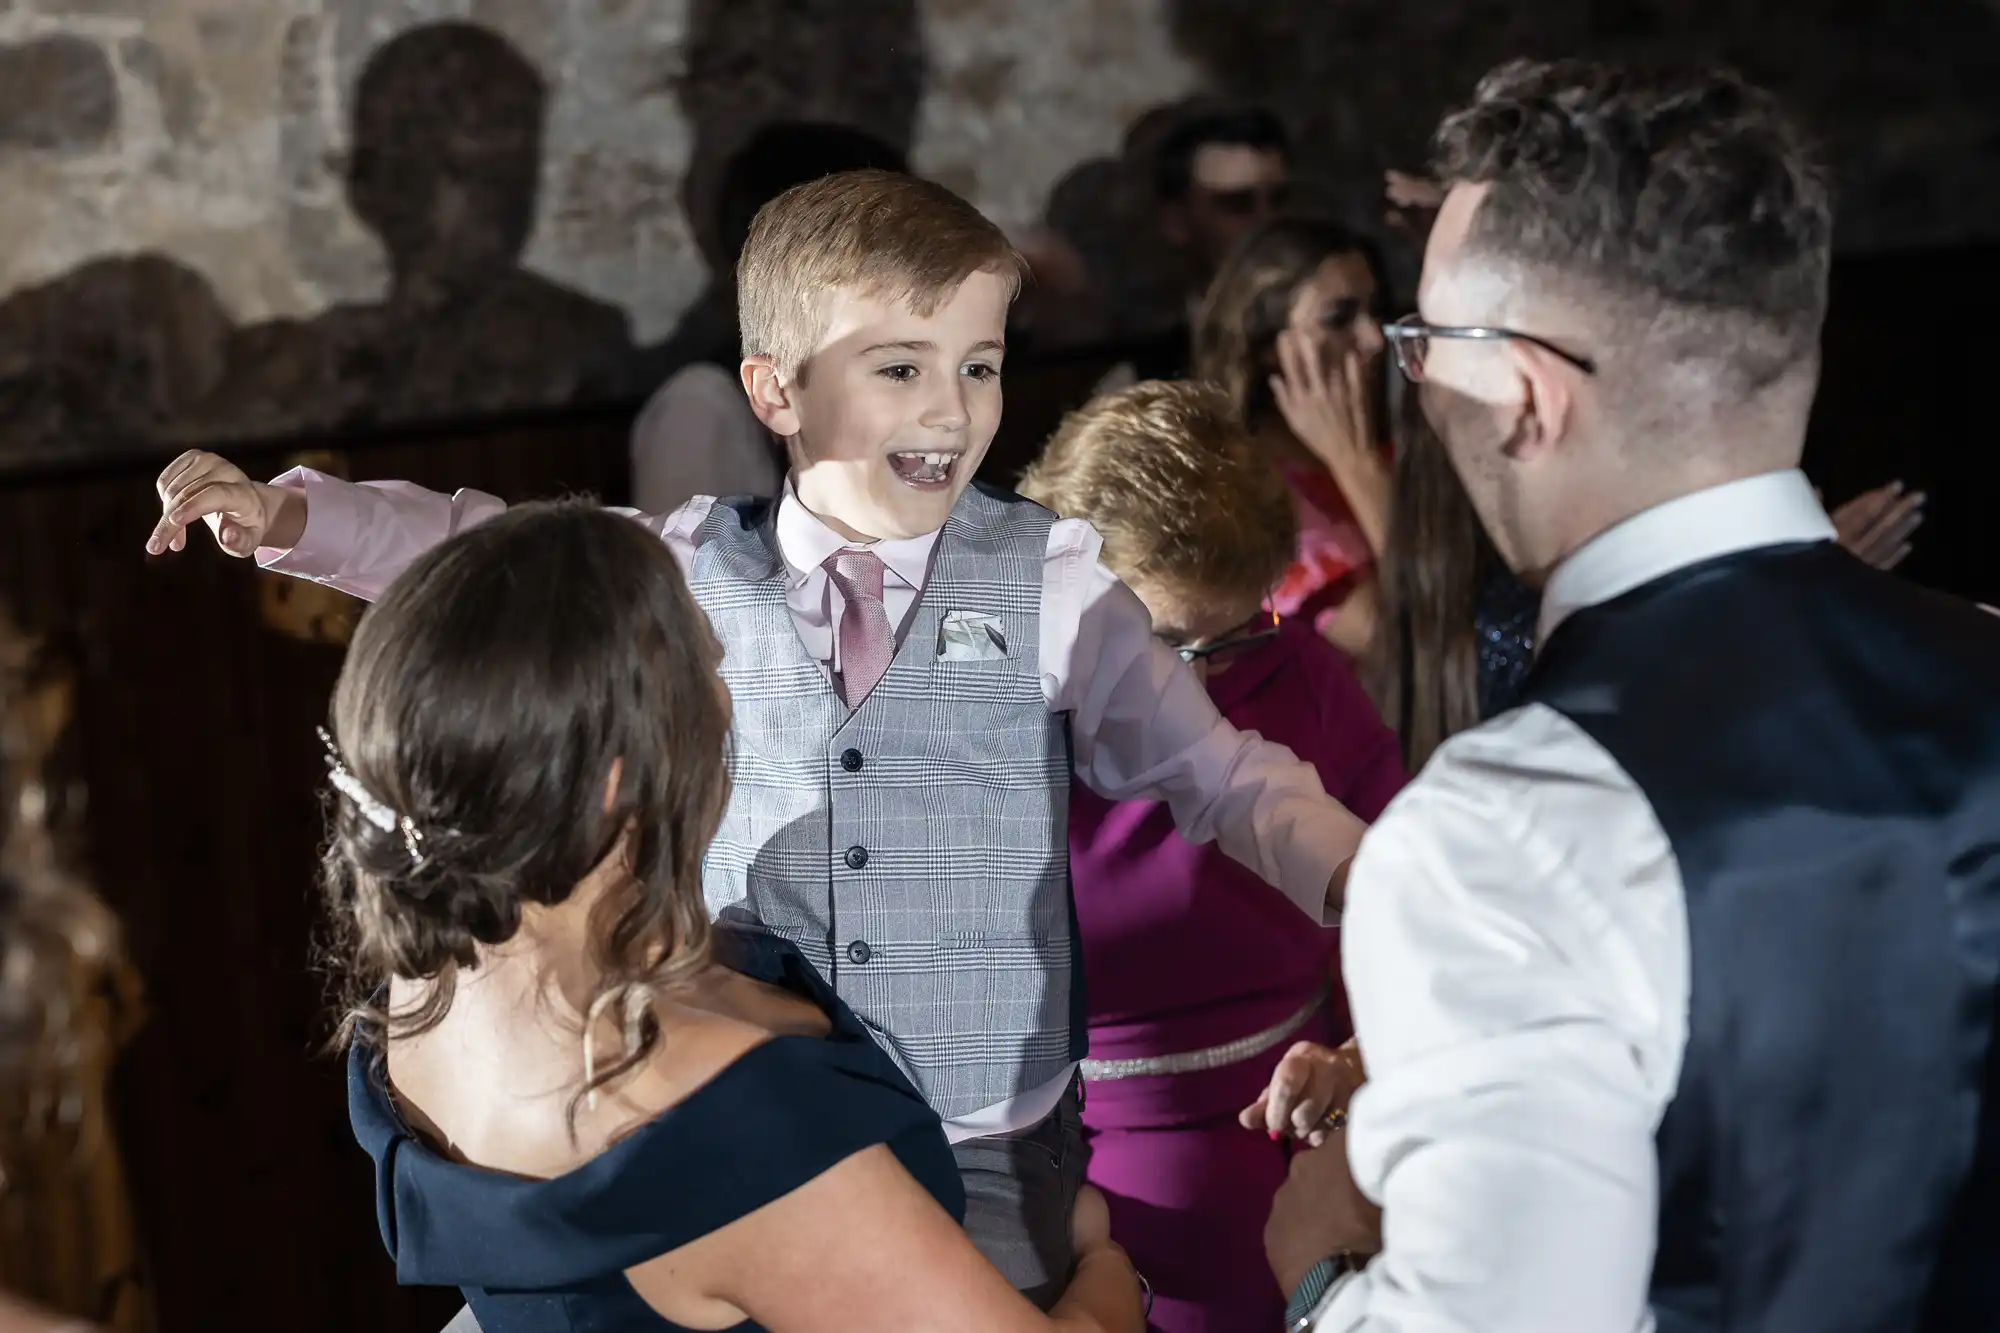 A young boy in a vest and tie joyfully dances at a party, pointing towards a man, with other guests around them enjoying the festivities.